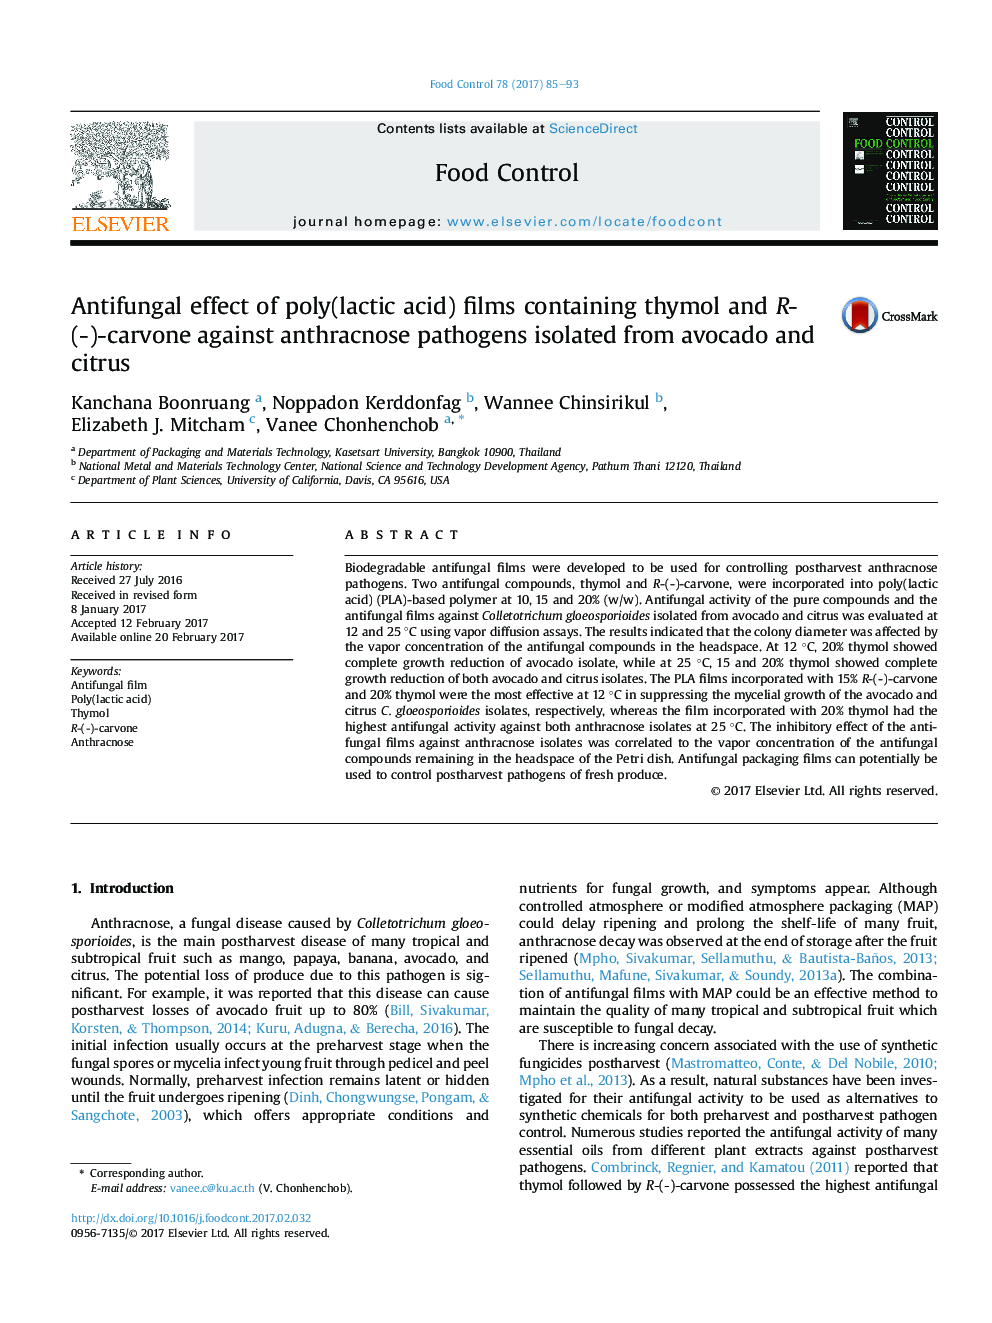 Antifungal effect of poly(lactic acid) films containing thymol and R-(-)-carvone against anthracnose pathogens isolated from avocado and citrus